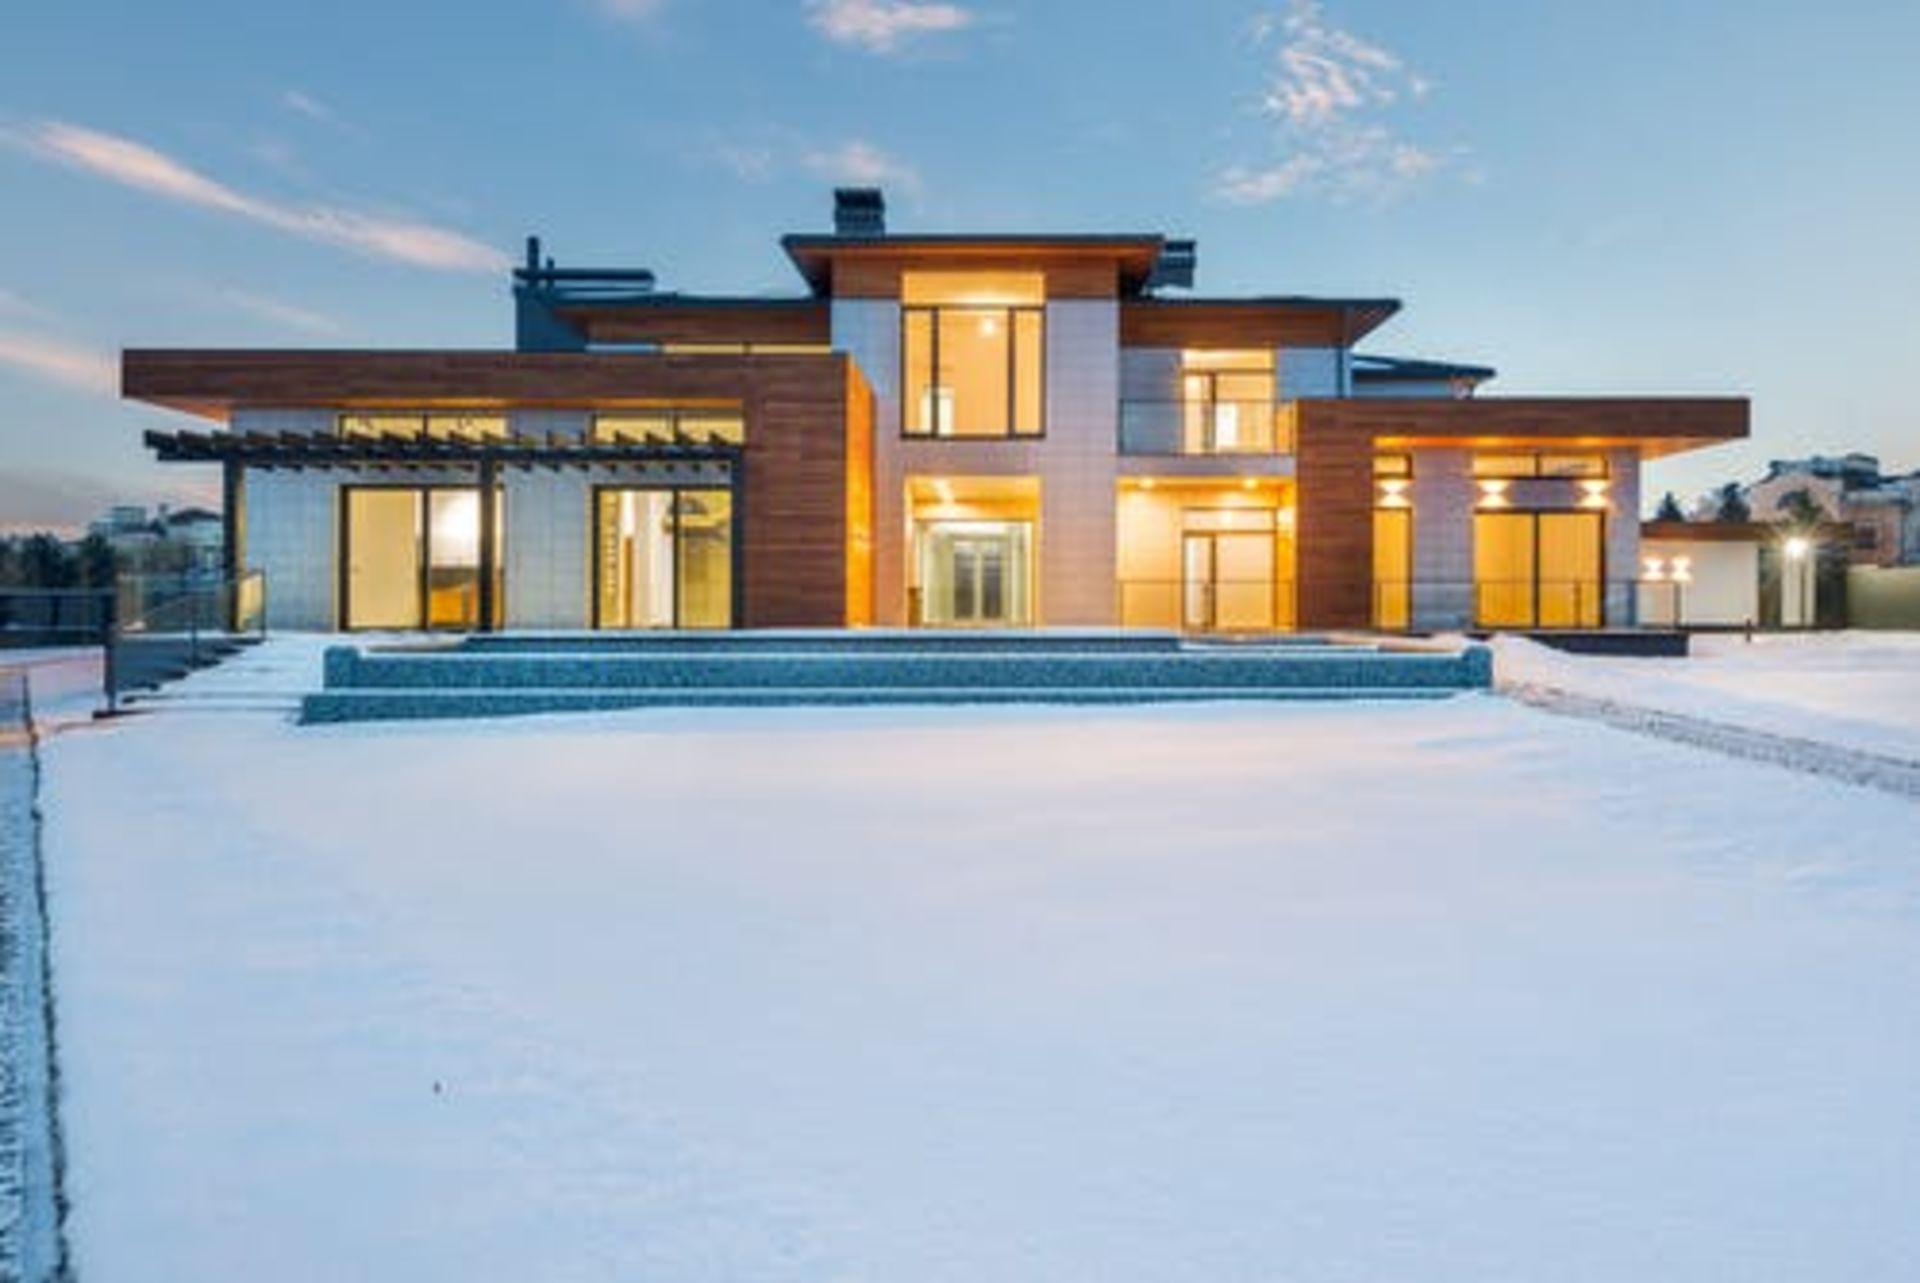 17 Tips For Winterizing Your Home